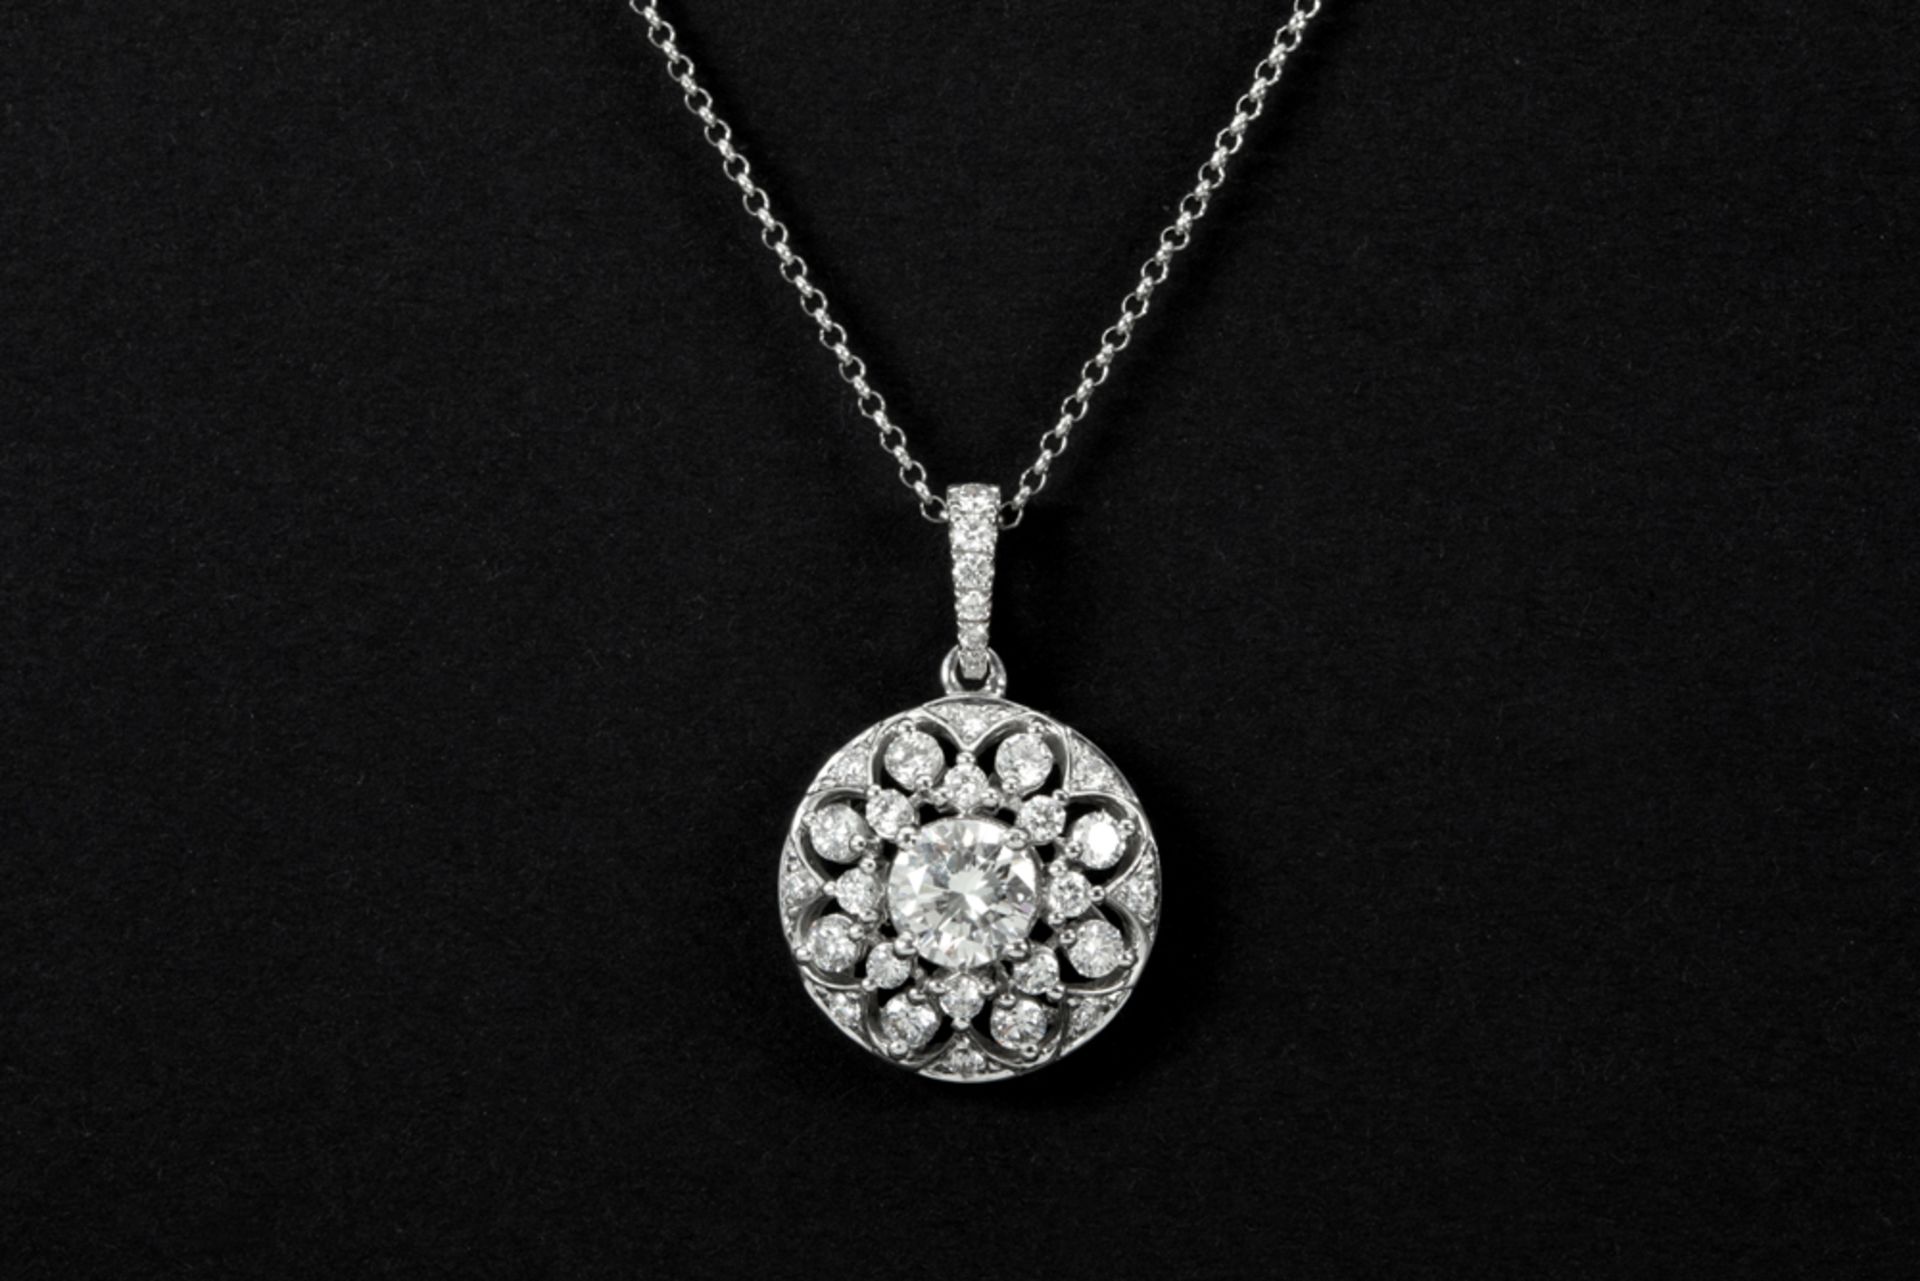 pendant in white gold (18 carat) with a central 0,70 carat high quality brilliant cut diamond,